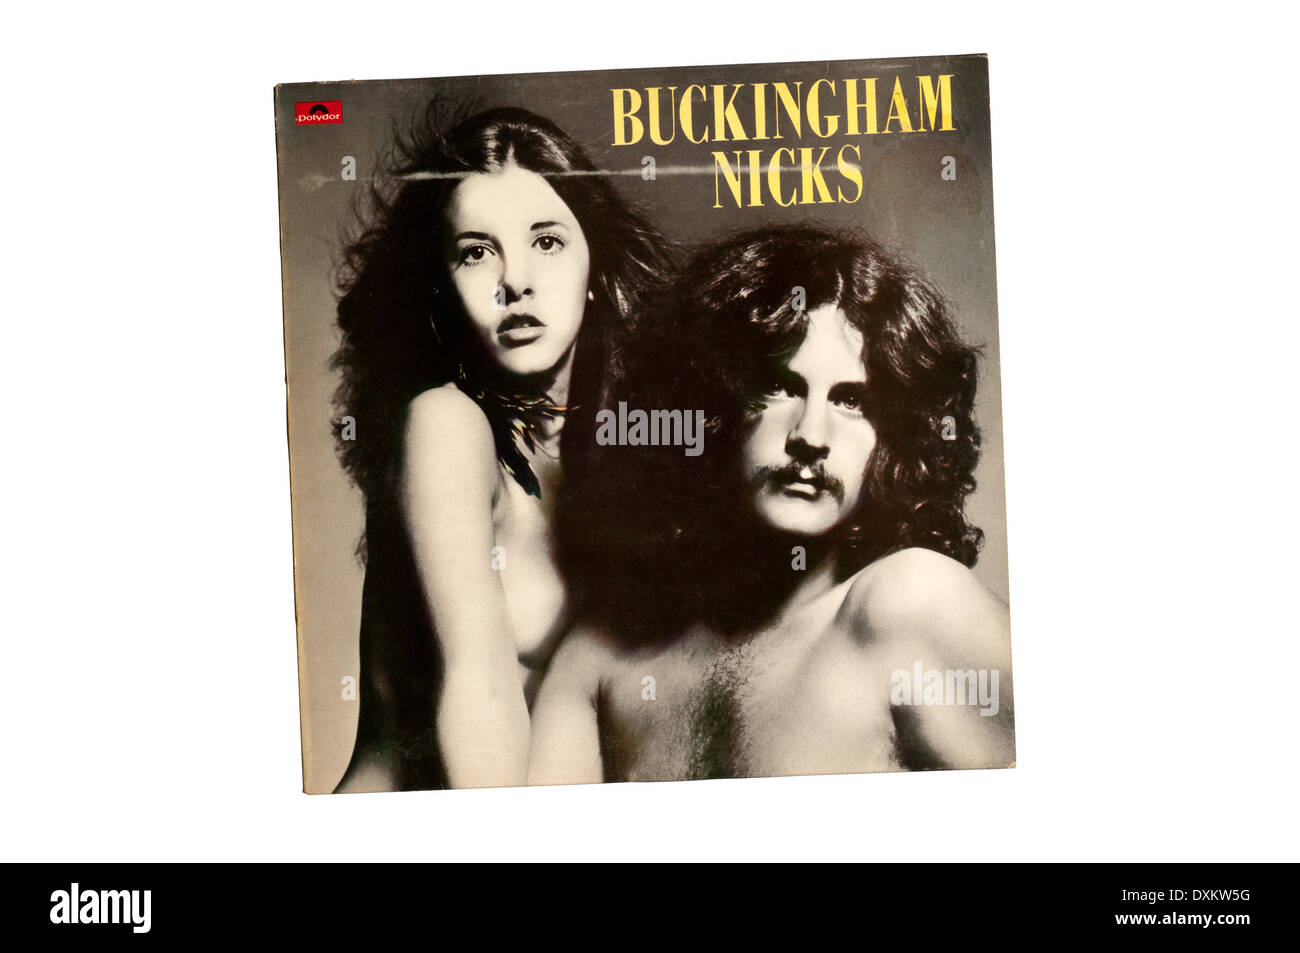 Buckingham Nicks was the eponymous debut and sole studio album by the American rock duo Buckingham Nicks. Released in 1973. Stock Photo